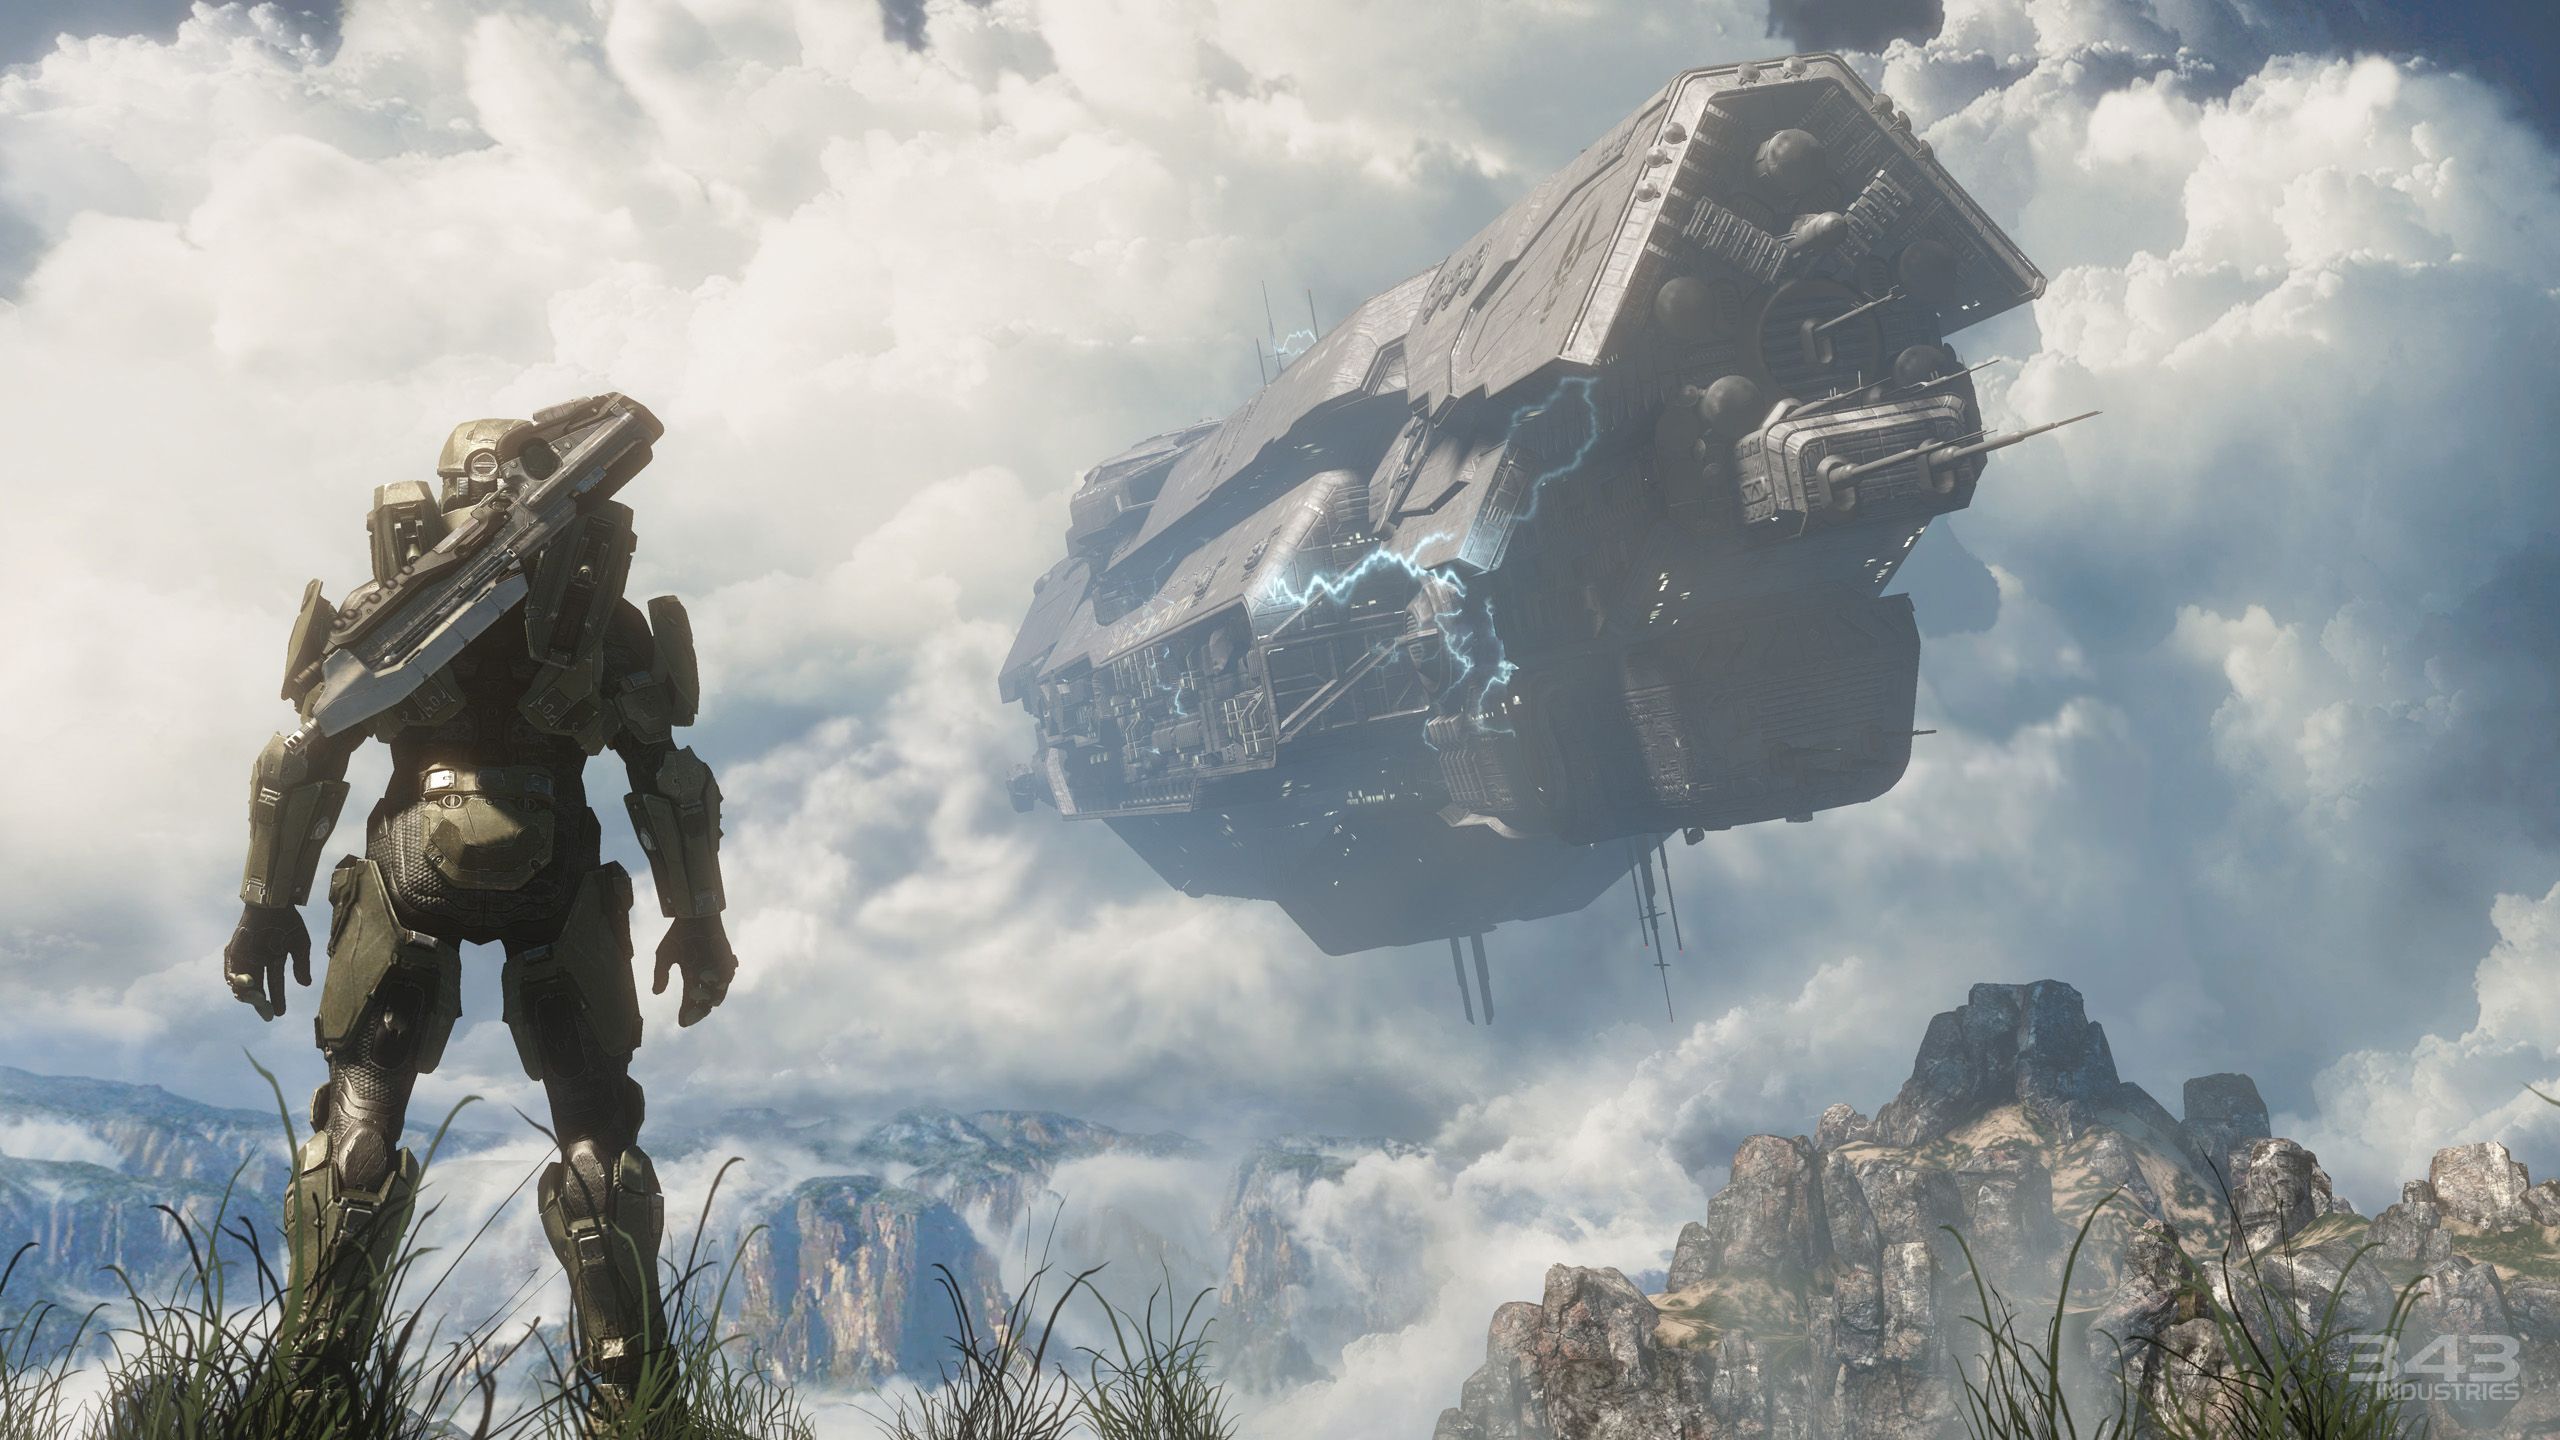 A Halo Reach Map Has Leaked for the Upcoming Halo Infinite